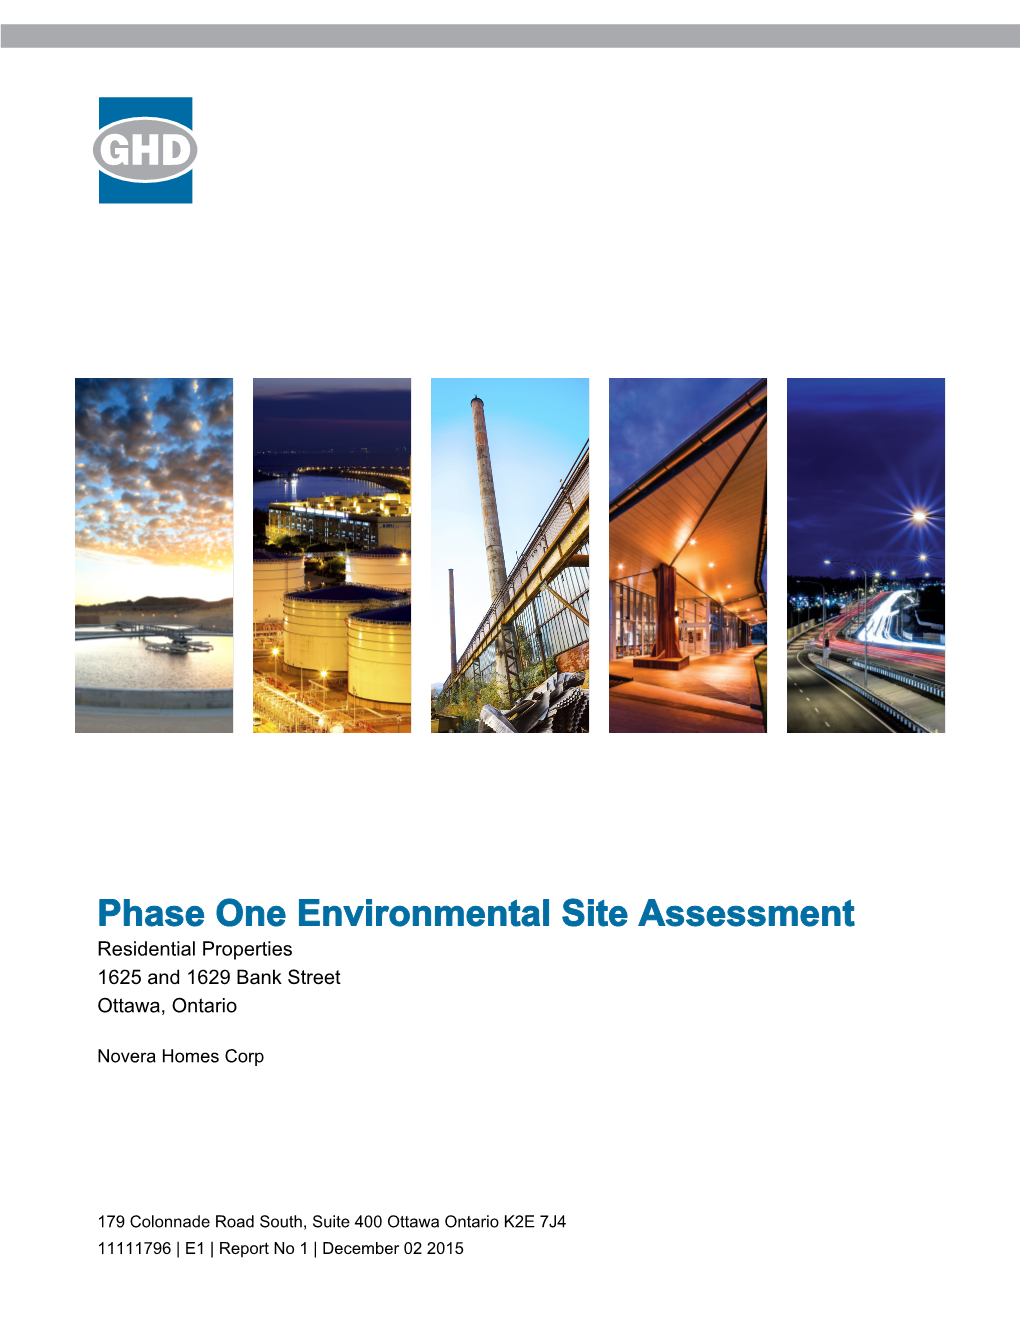 Phase One Environmental Site Assessment Residential Properties 1625 and 1629 Bank Street Ottawa, Ontario